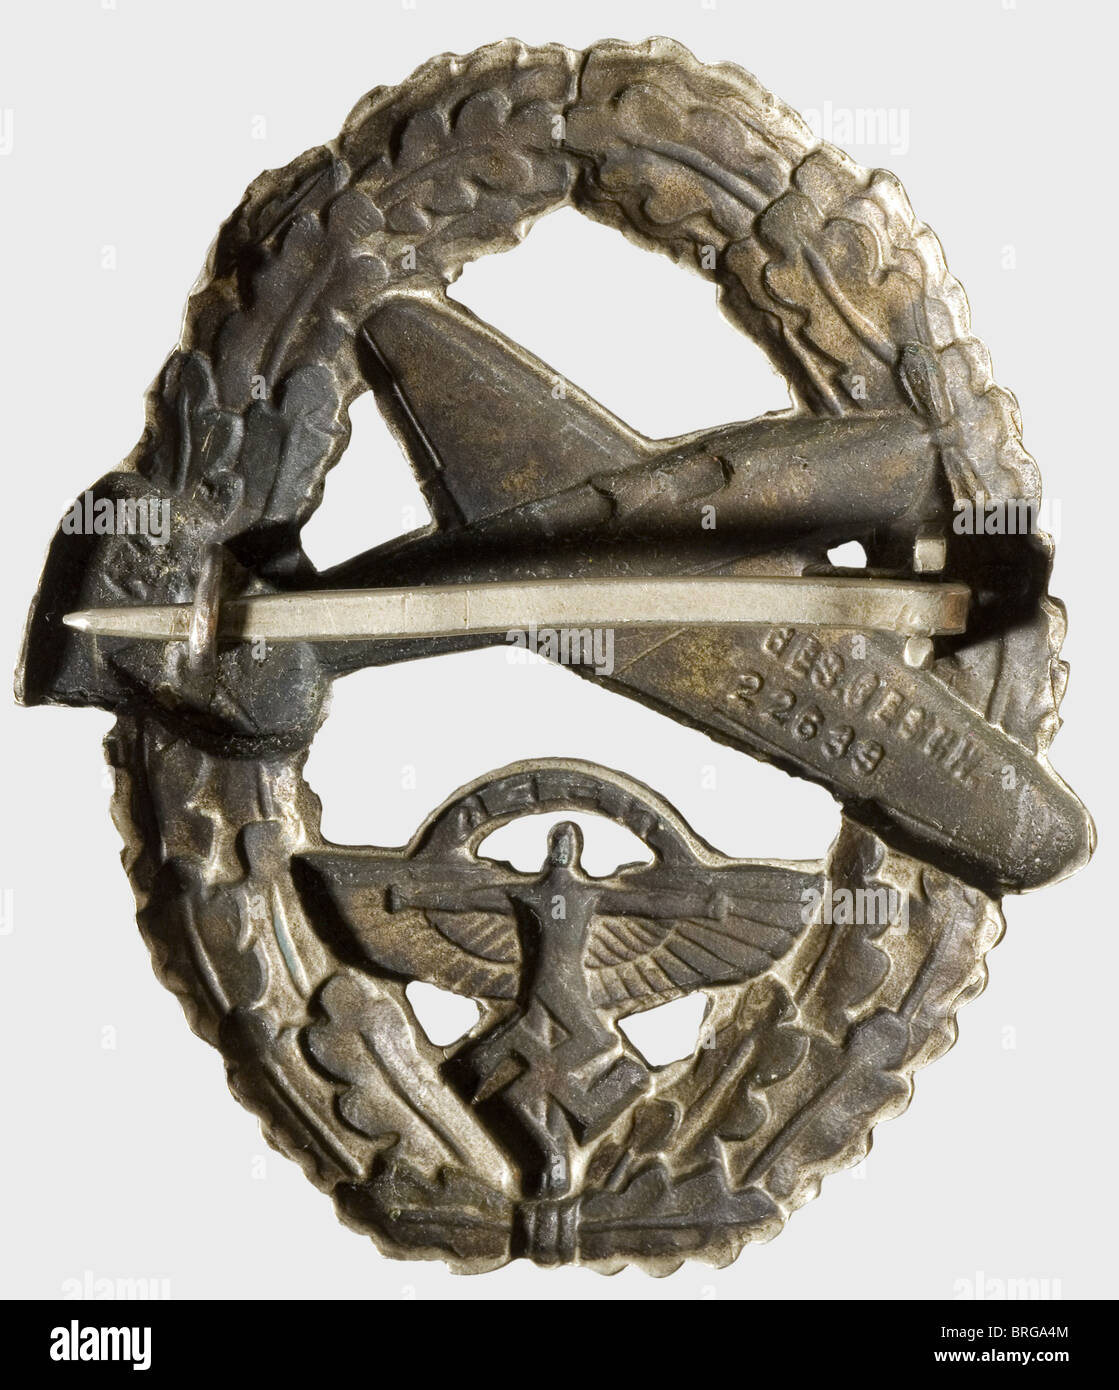 A NSFK Badge for Powered Aircraft Pilot,2nd issue after 1939 Silver-plated non-ferrous metal,hollow-stamped,the reverse marked 'Ges Gesch 22638',flat nickel silver pin attachment(OEK 3673). The badge introduced on 1 May 1939 superseded the earlier,silver-embroidered cloth issue badge and,as Christiansen wished,it bore the NSFK emblem instead of the swastika.,historic,historical,1930s,20th century,awards,award,German Reich,Third Reich,Nazi era,National Socialism,object,objects,stills,medal,decoration,medals,decorations,clipping,cut out,Additional-Rights-Clearences-Not Available Stock Photo